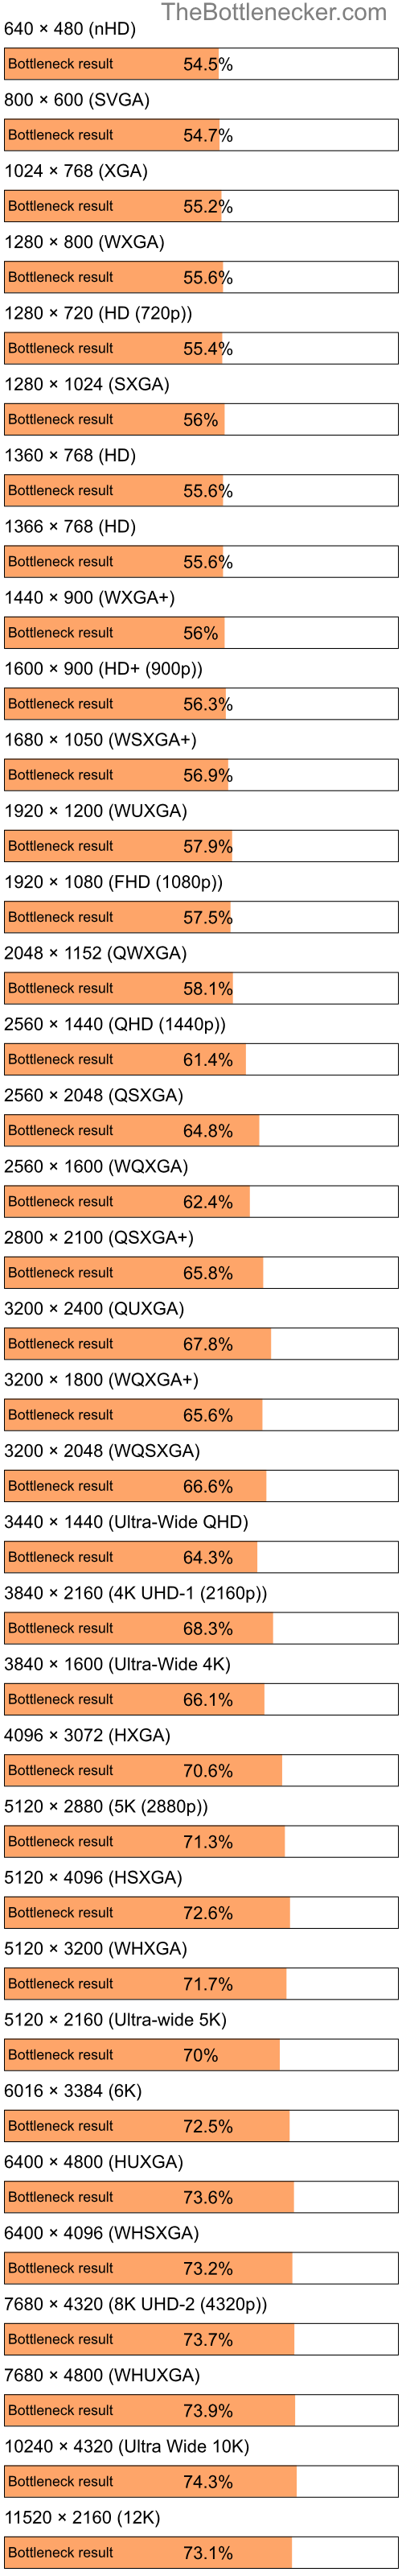 Bottleneck results by resolution for Intel Pentium 4 and NVIDIA GeForce 9300M GS in Processor Intense Tasks